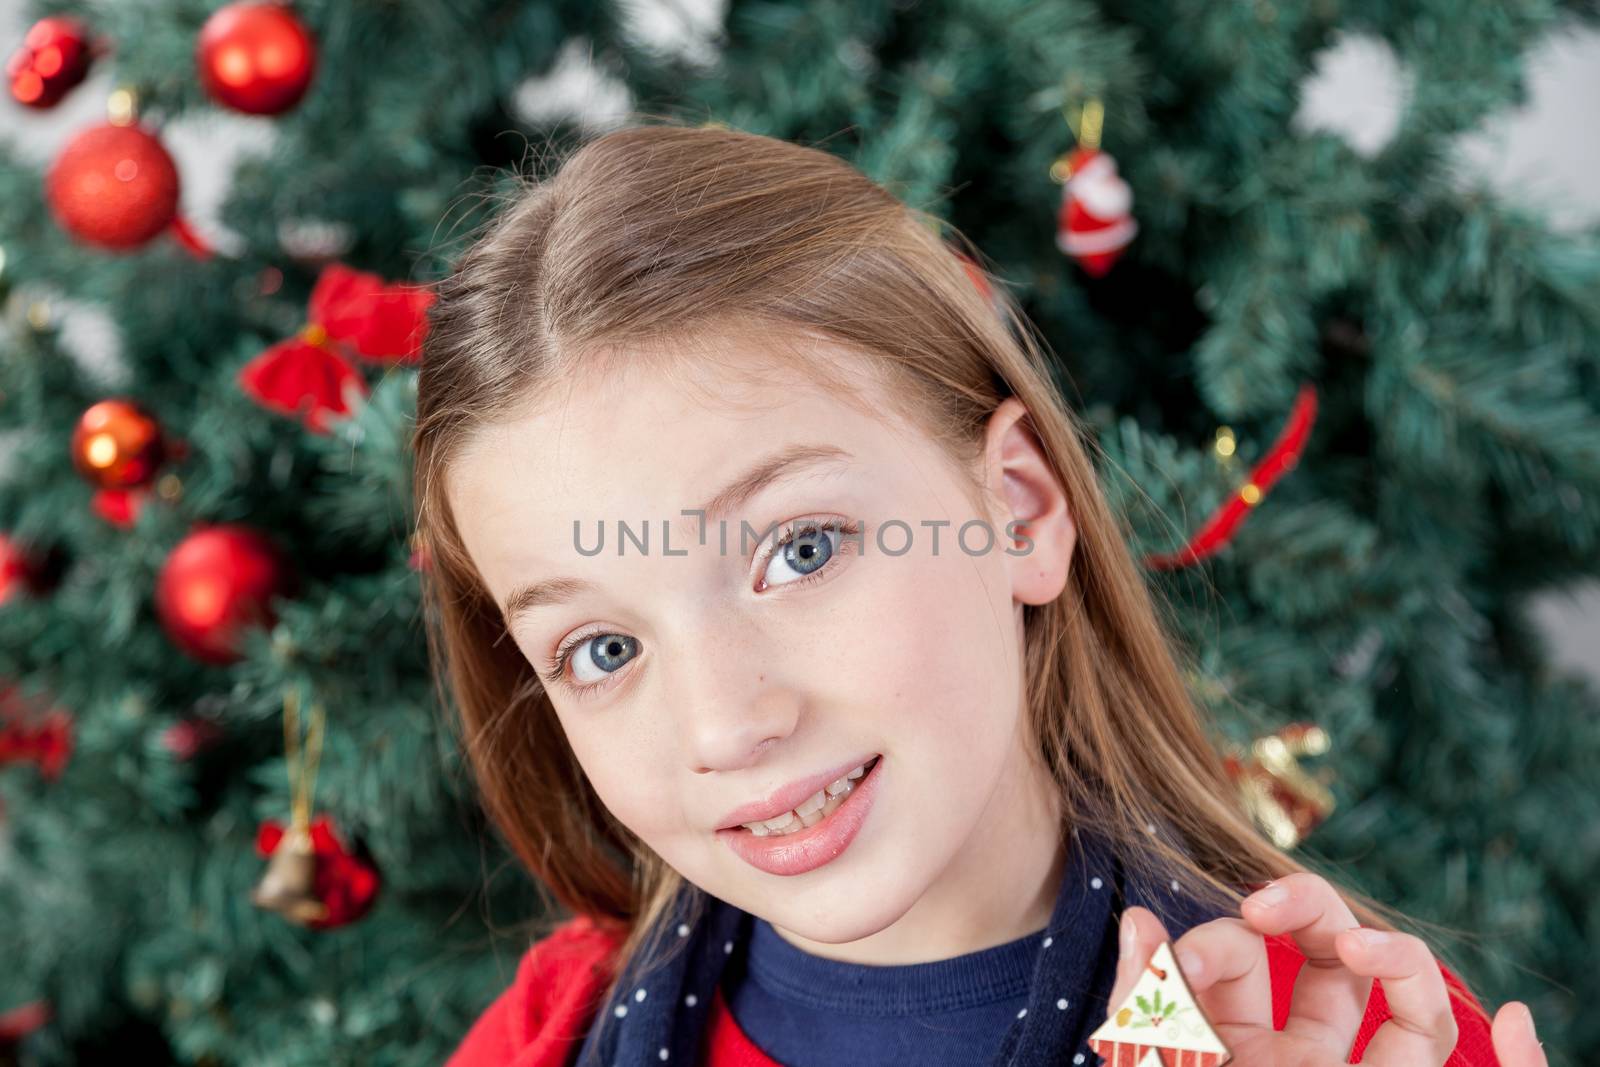 8-10, anticipation, background, backround, ball, girl, pretty, blonde, caucasian, christmas, christmastime, decorations, gift, green, hair, hold, holding, holiday, indoors, look, looking, female, model, old, one, only, present, profile, property, red, releases, side, single, smile, standing, studio, sweater, the, tree, horizontal, green, winter, xmas, years